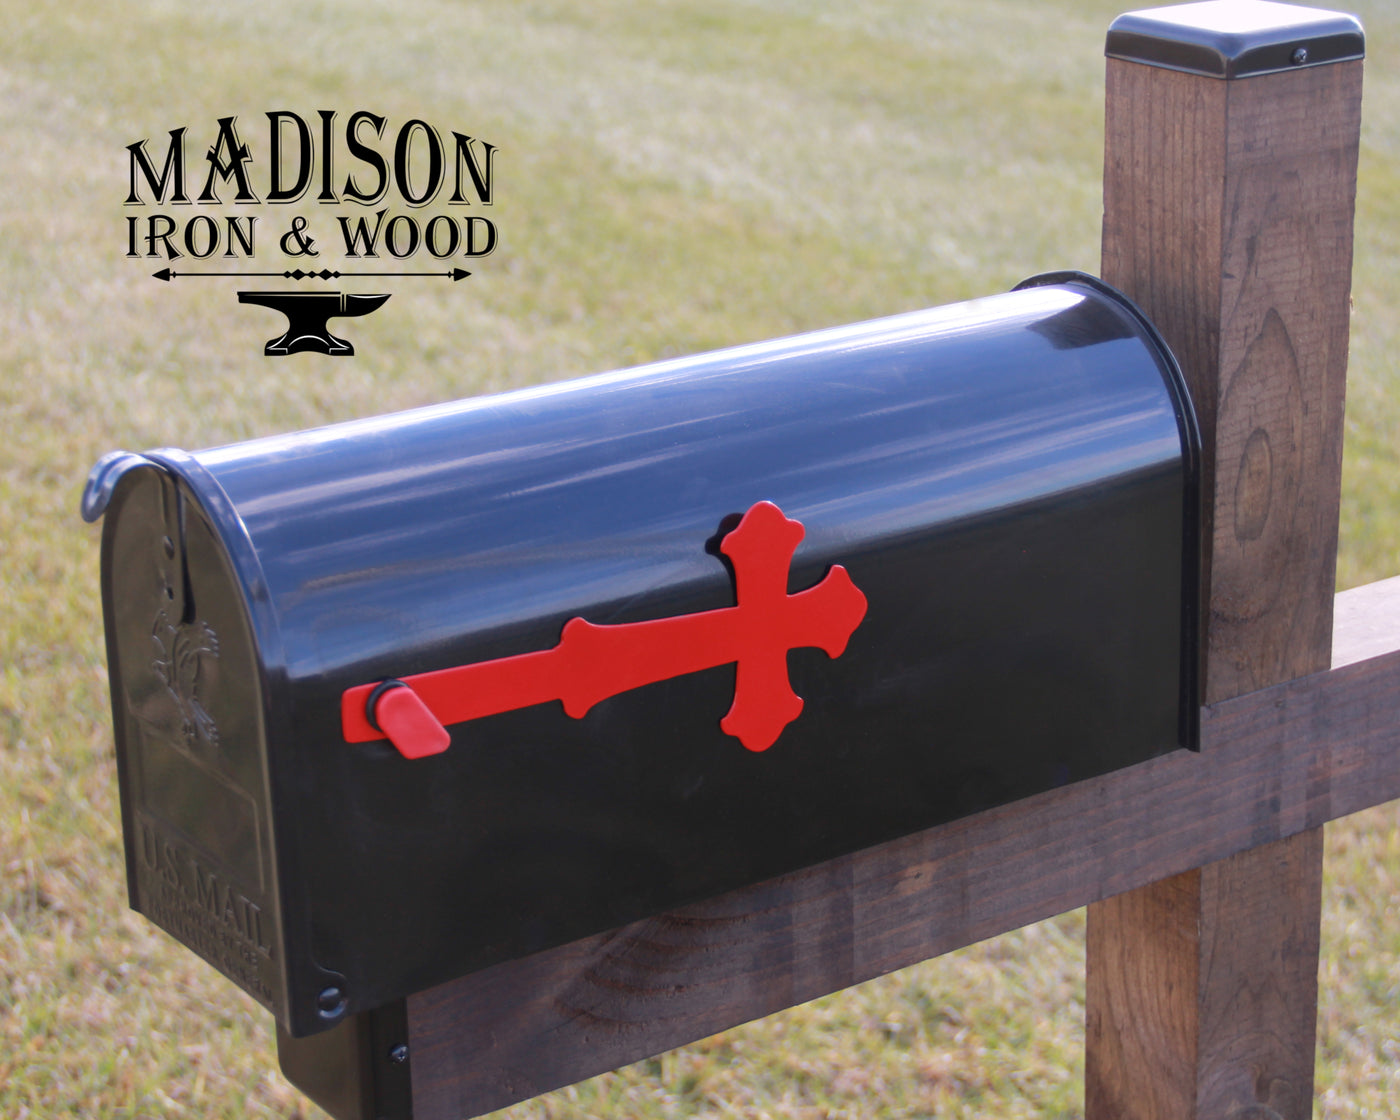 Cross Mailbox Flag - Madison Iron and Wood - Mailbox Post Decor - metal outdoor decor - Steel deocrations - american made products - veteran owned business products - fencing decorations - fencing supplies - custom wall decorations - personalized wall signs - steel - decorative post caps - steel post caps - metal post caps - brackets - structural brackets - home improvement - easter - easter decorations - easter gift - easter yard decor